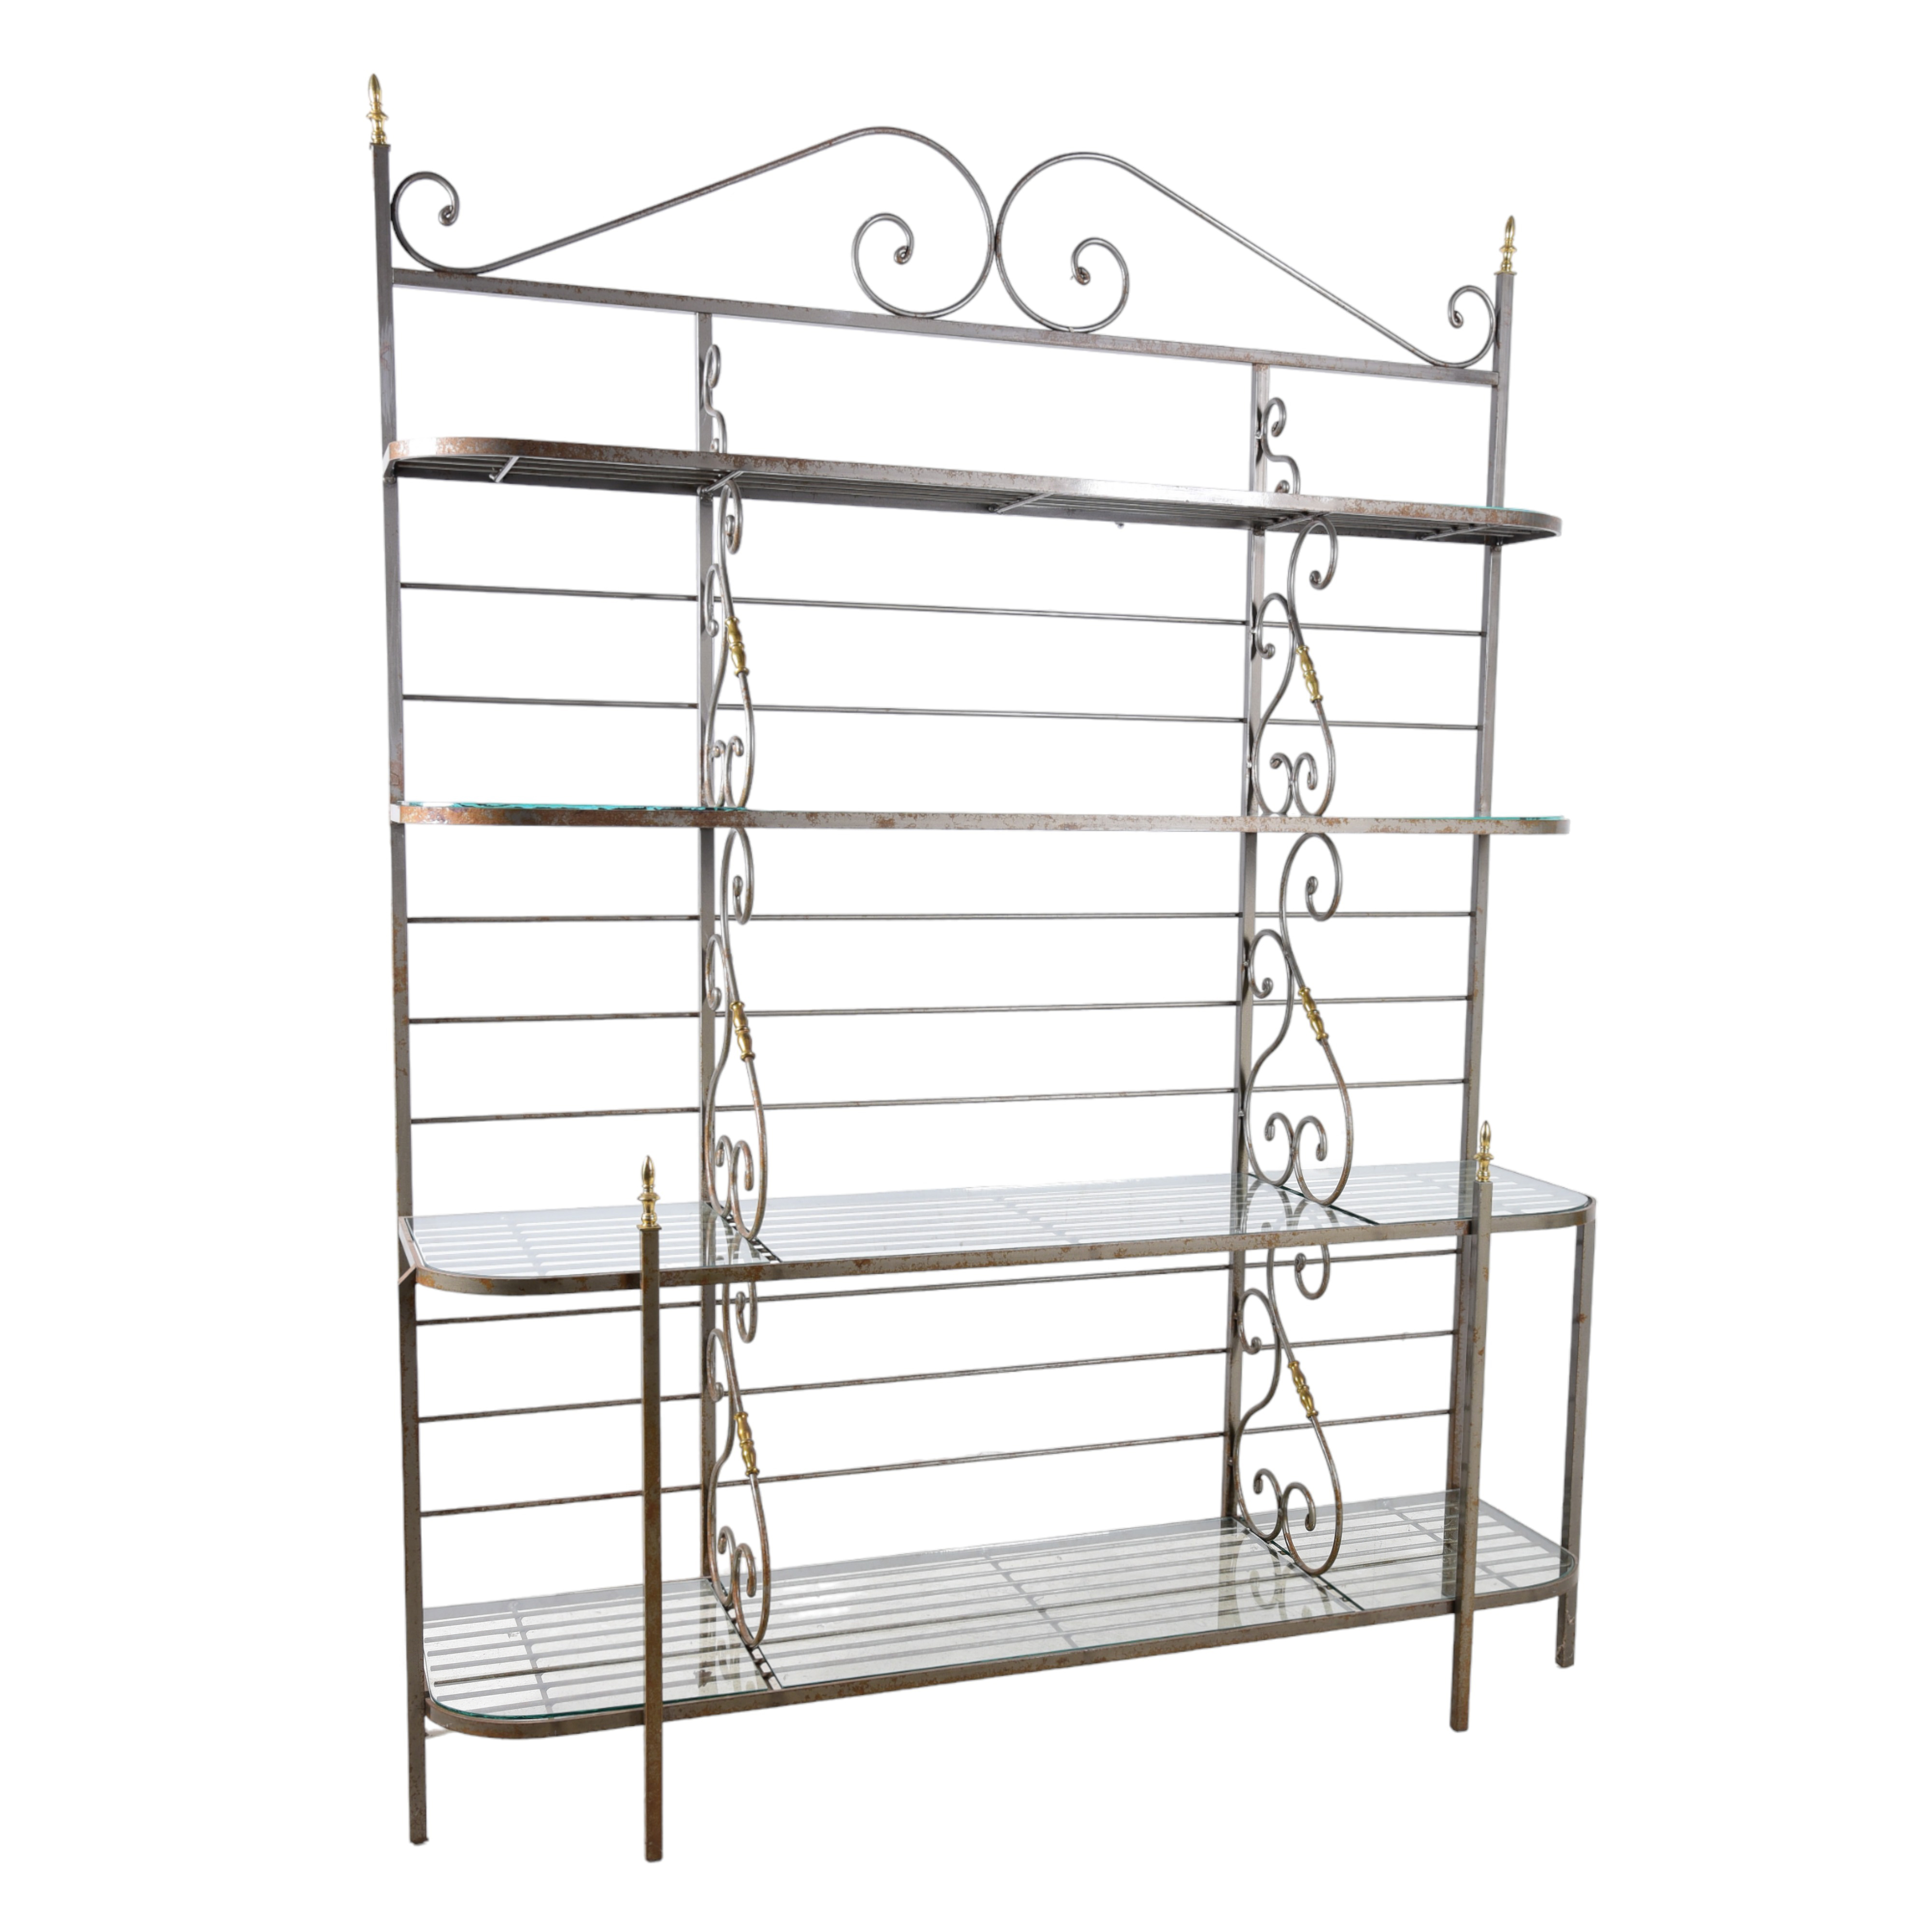 Chrome and brass bakers rack, scrolled